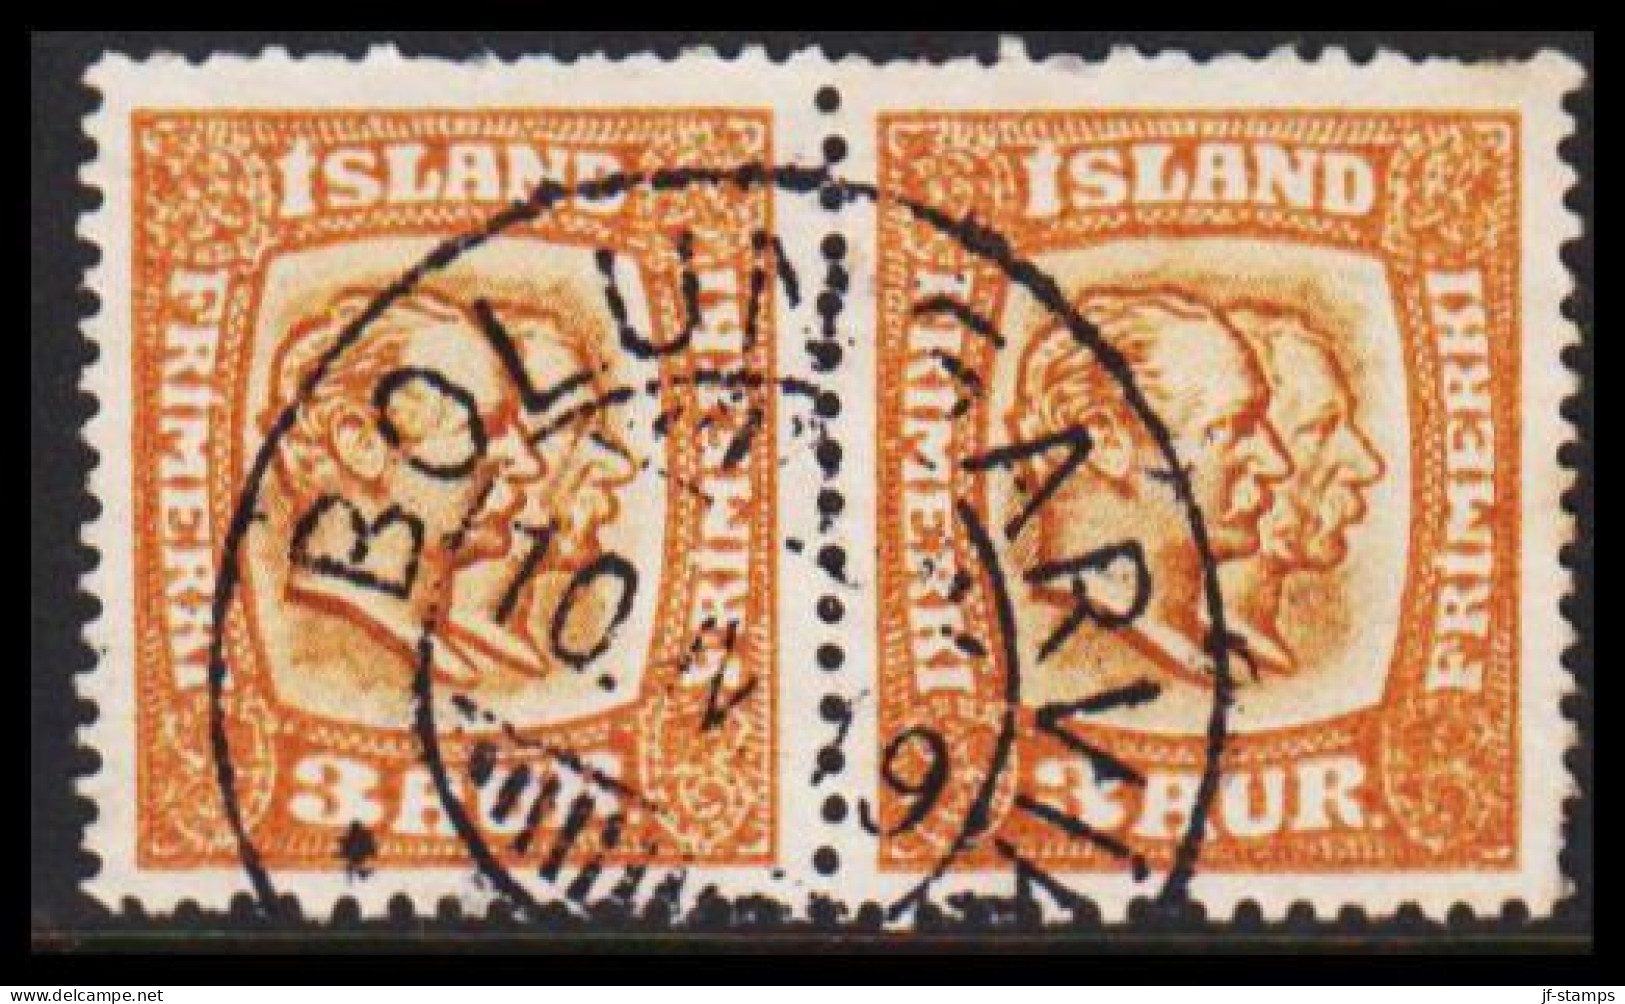 84 On 1915. Two Kings. 3 Aur Brown/yellow. Tk. 14x14½, Wm. Cross. Pair With Beautiful Cancel B... (Michel 77) - JF543279 - Used Stamps